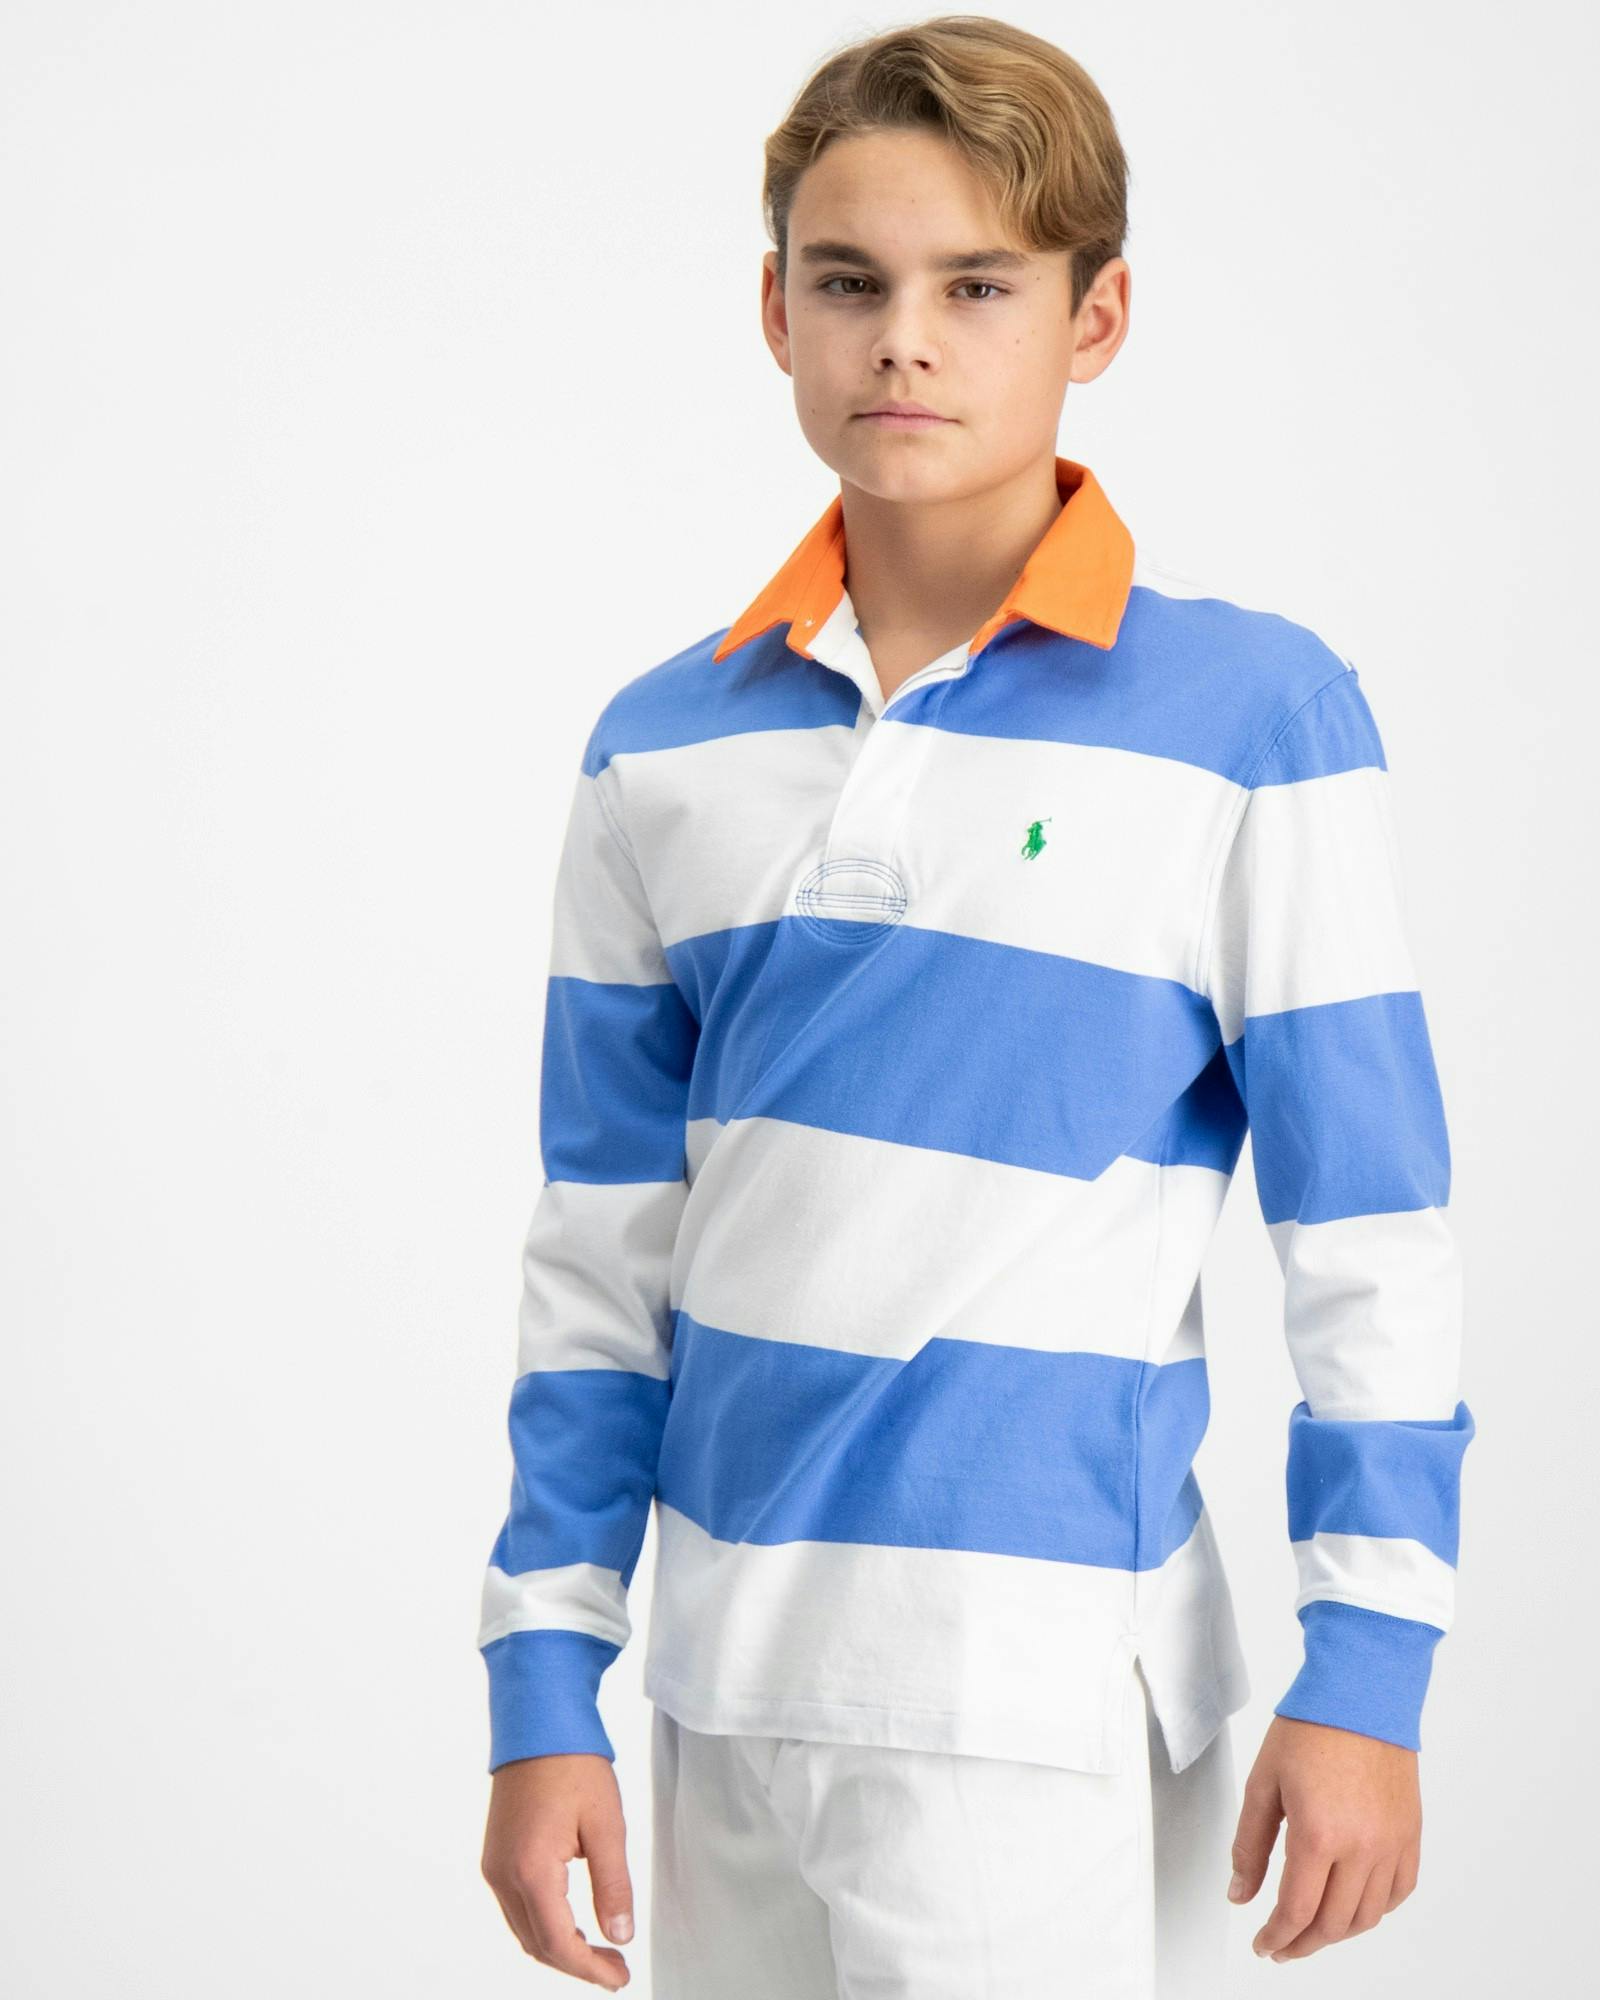 Striped Cotton Jersey Rugby Shirt